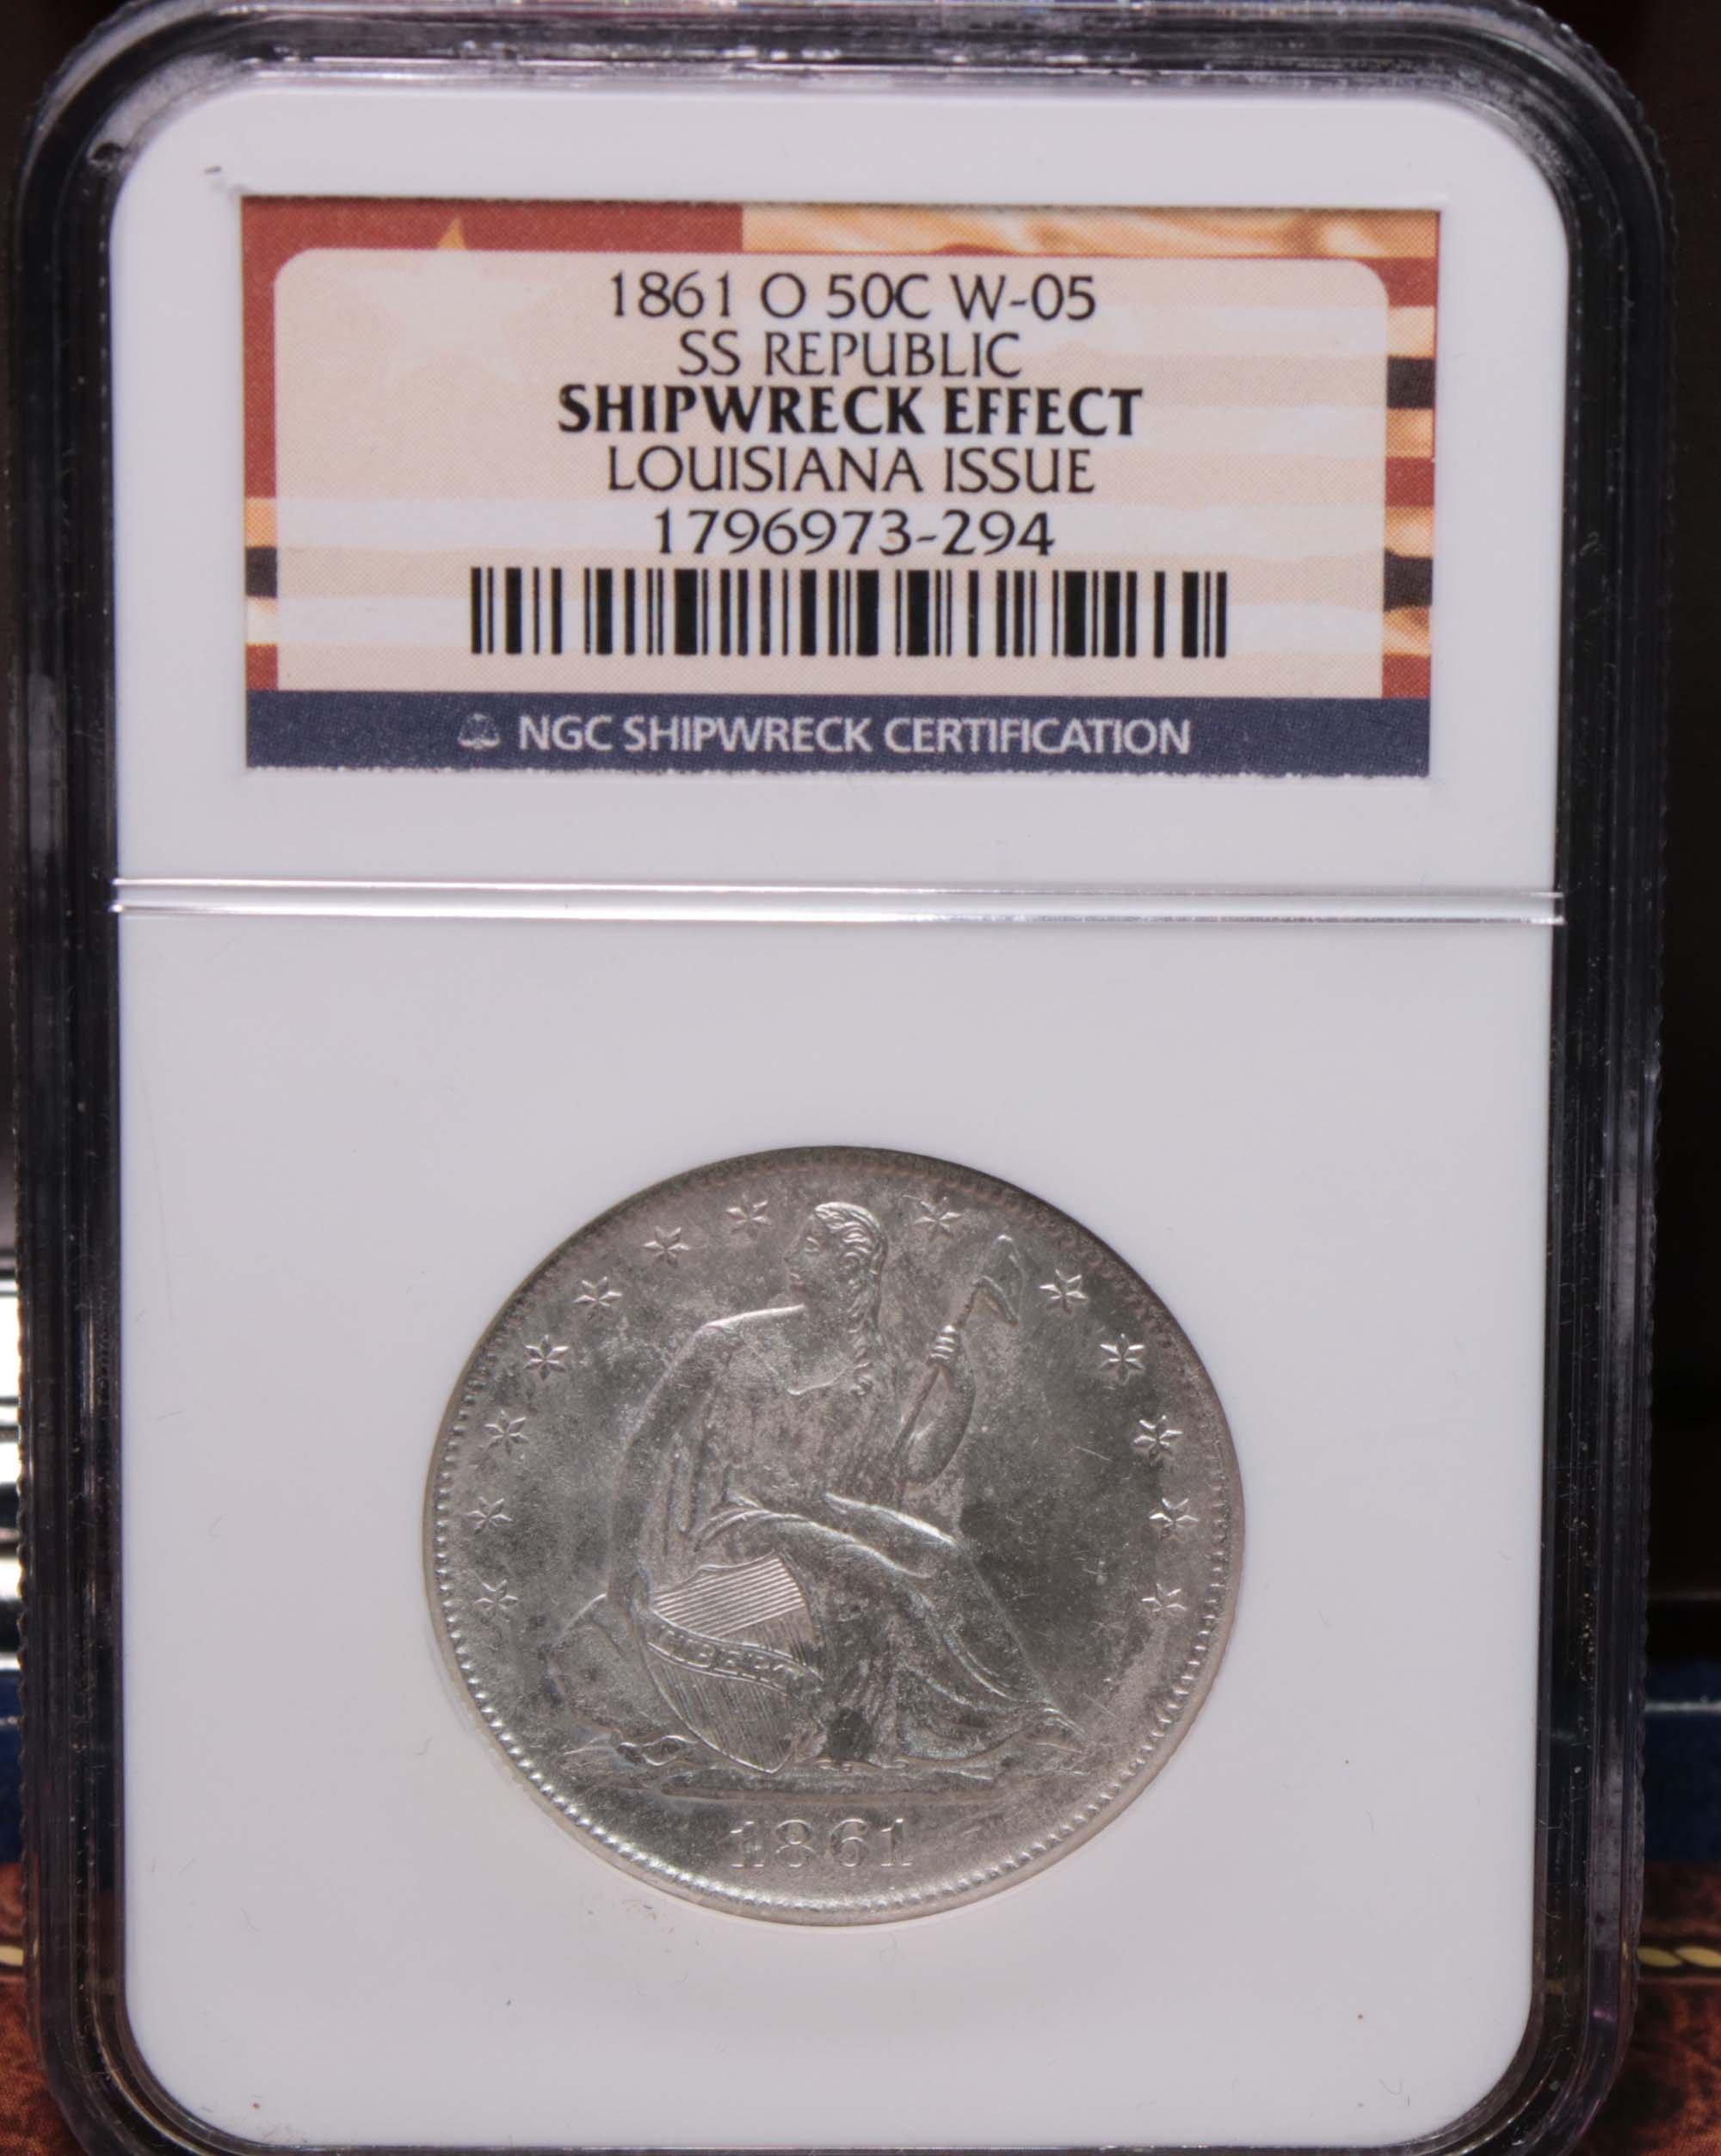 ***Auction Highlight*** NGC Louisiana Issued 1861-o SS Republic Shipwreck Seated Liberty 50c (fc)